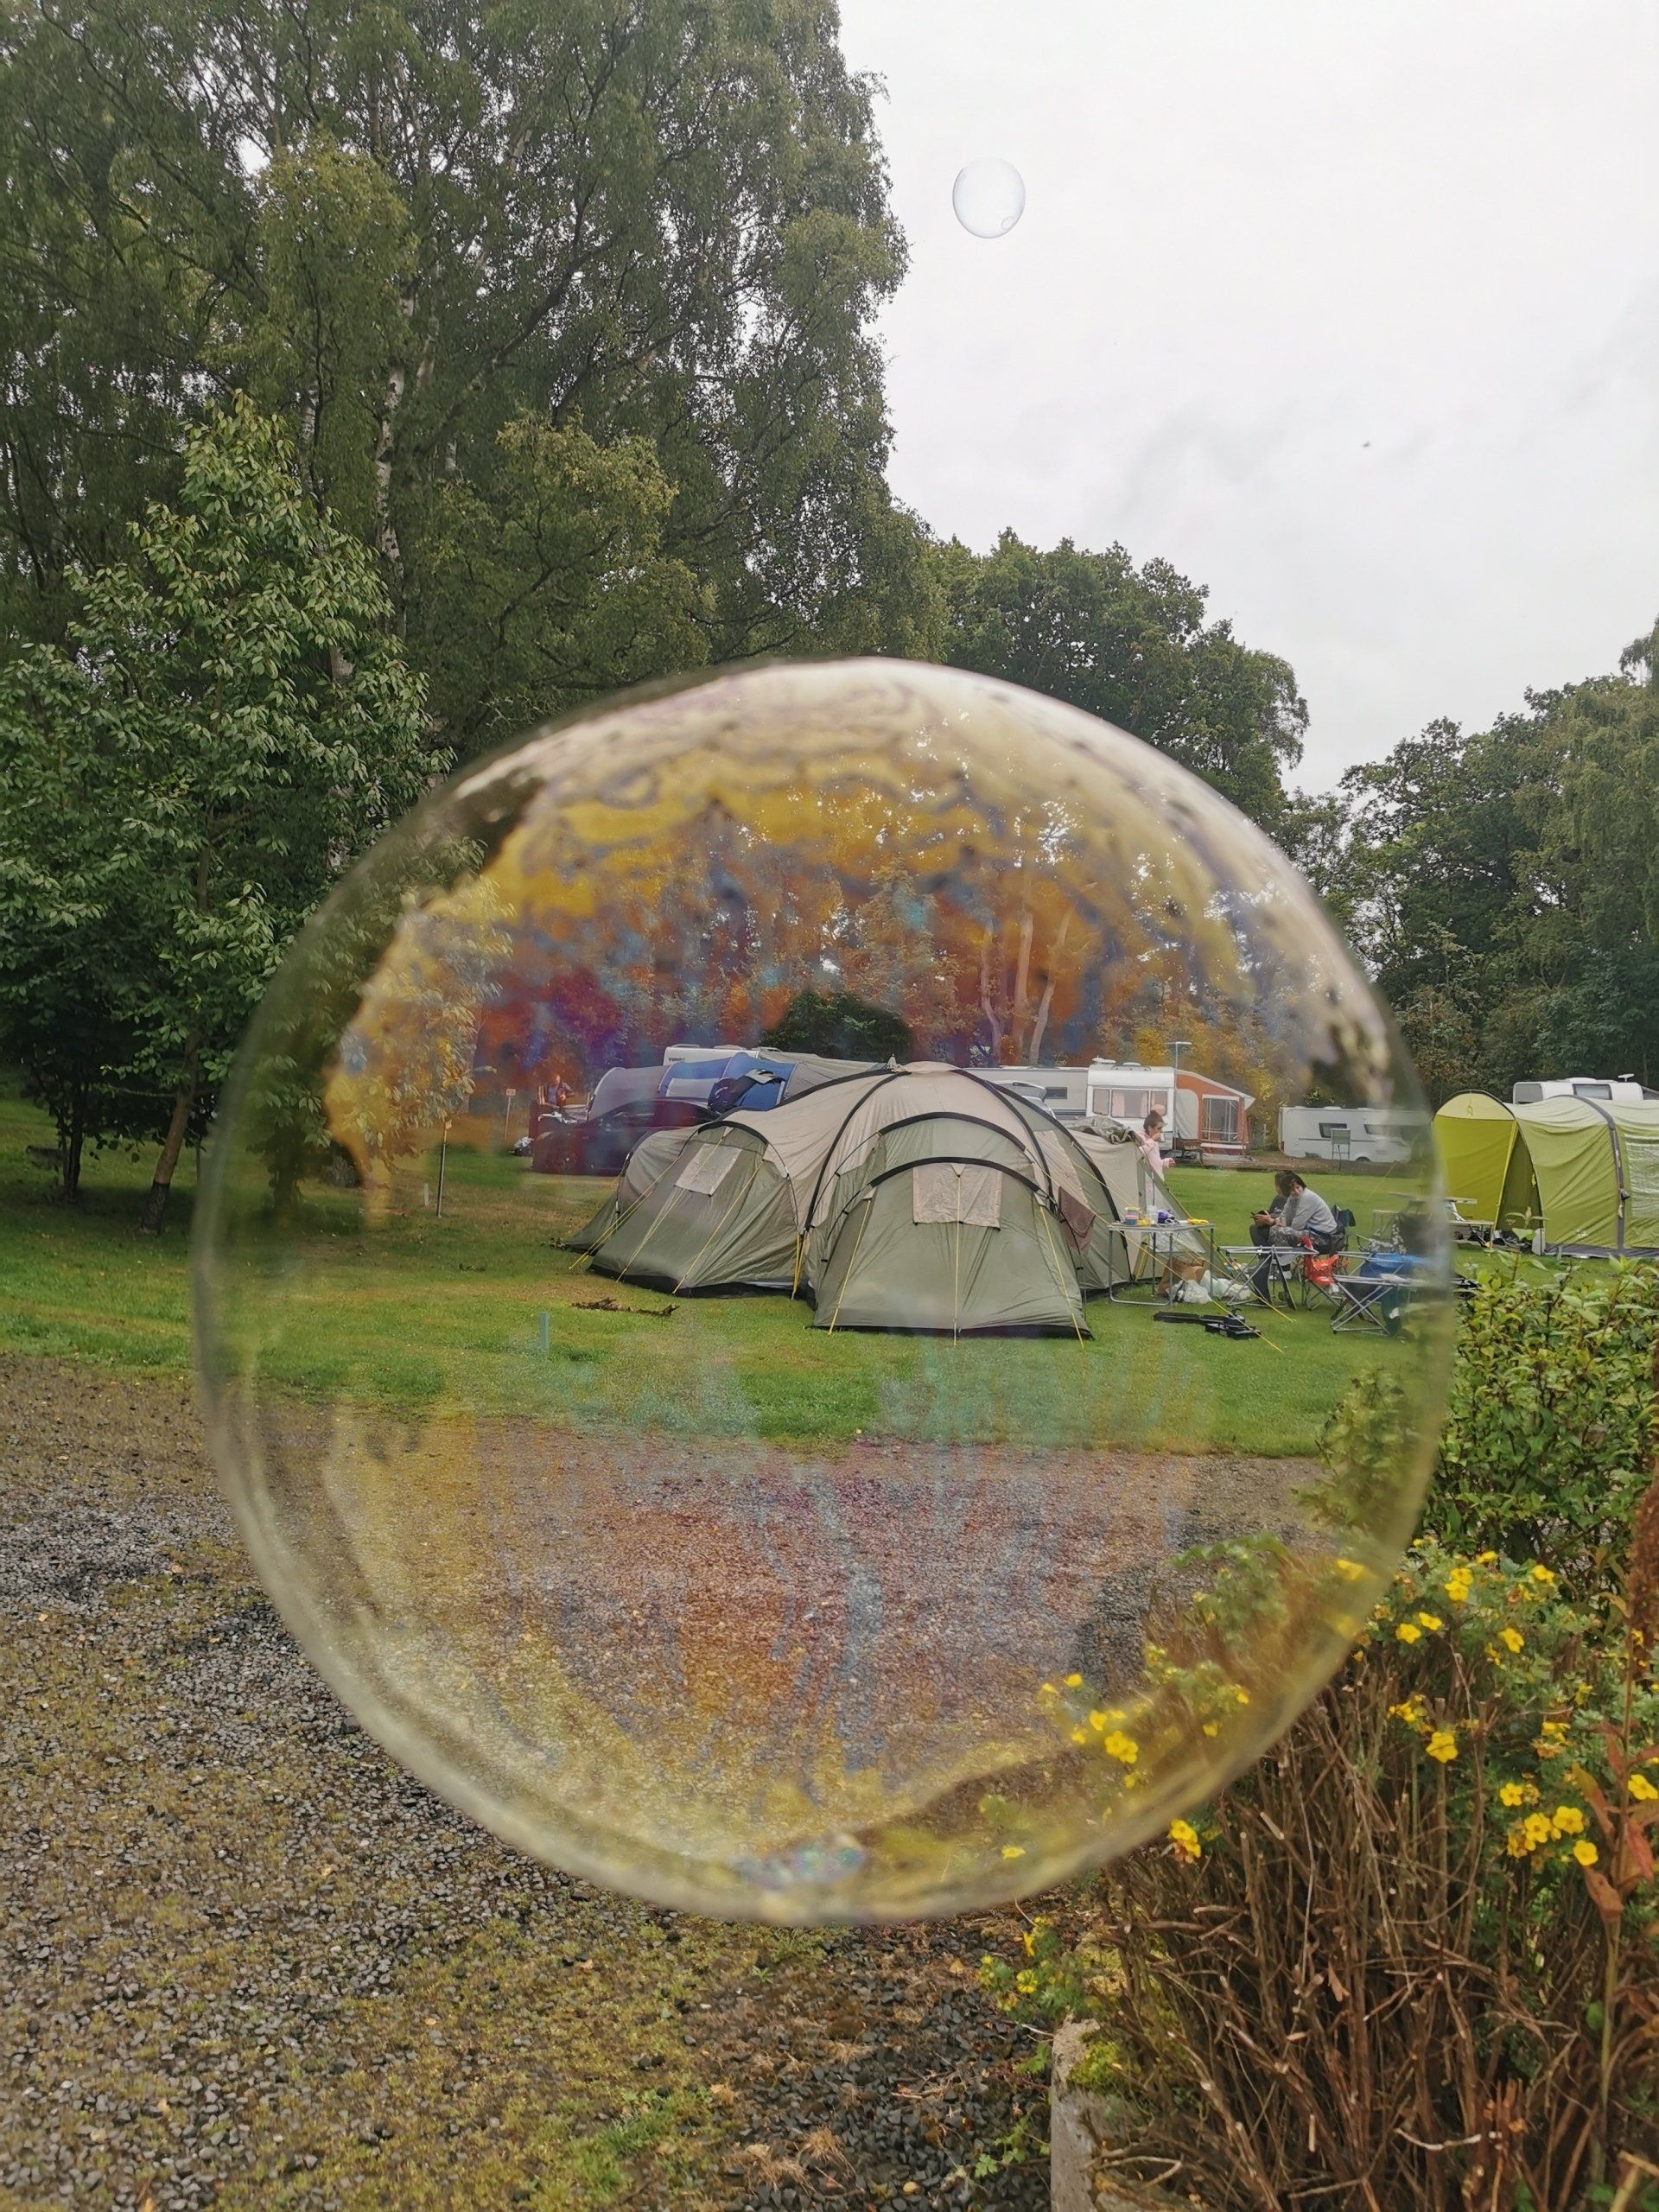 Image of a tent viewed through the lens of a soap bubble